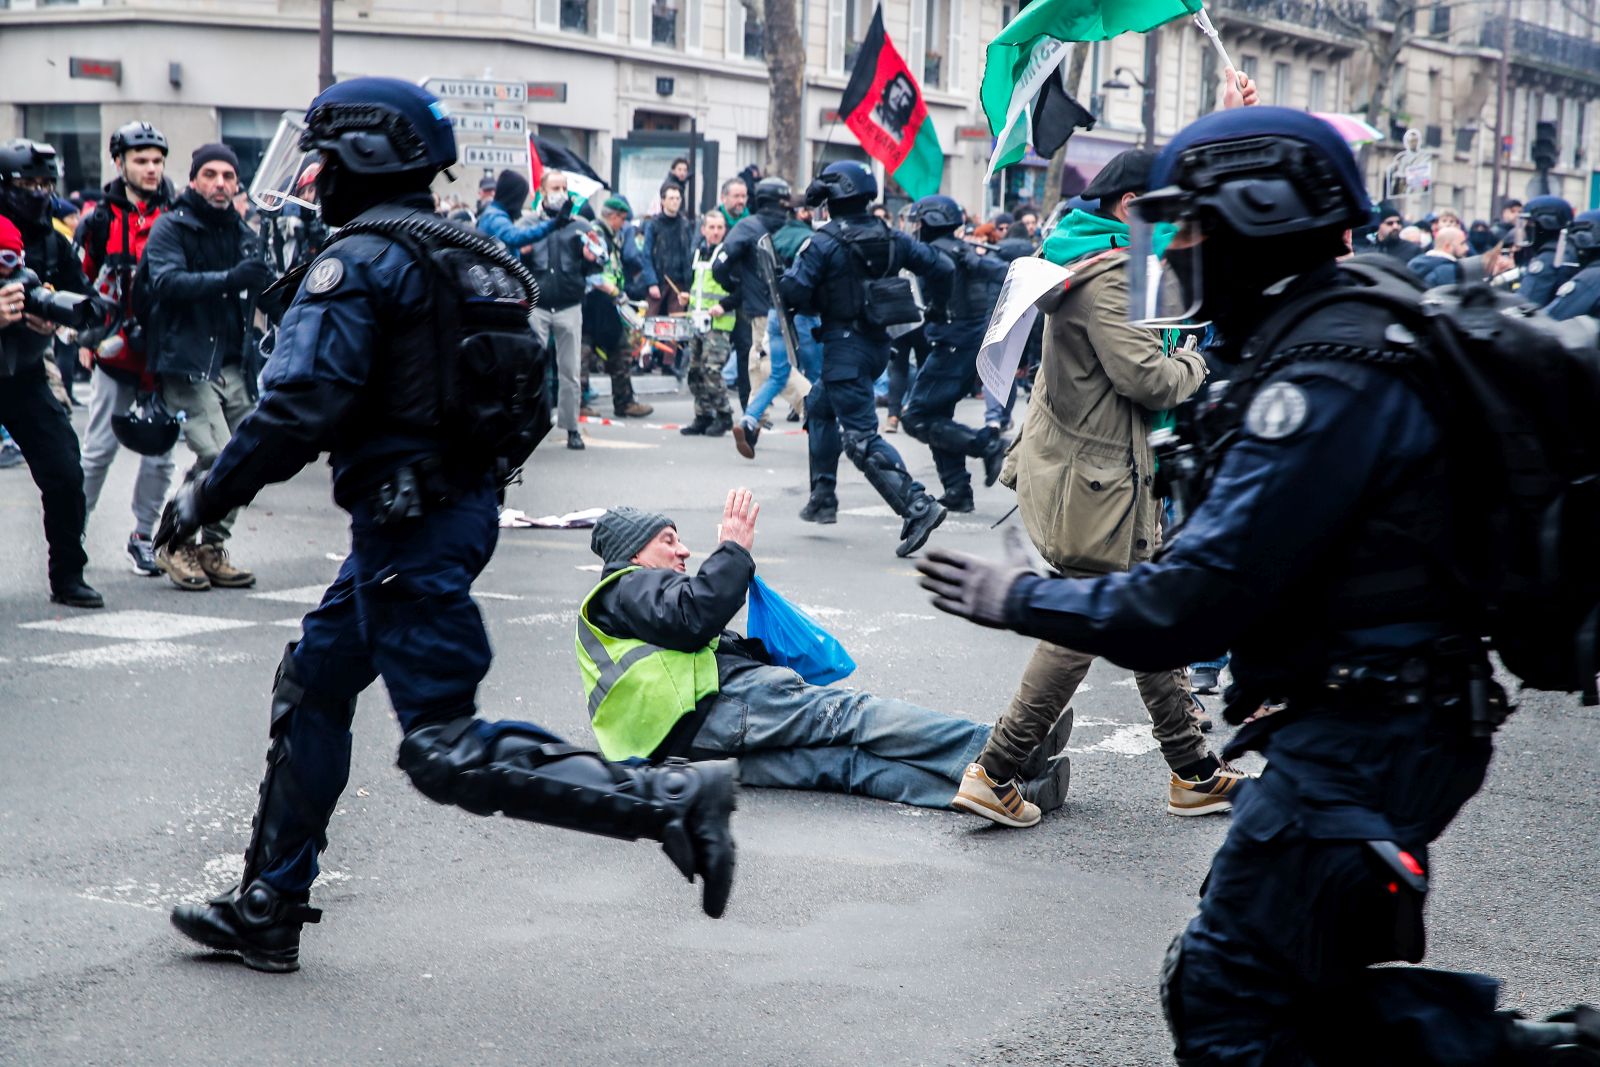 epa10515652 A demonstrator on the ground during a police charge during a new demonstration against the government's reform of the pension system in Paris, France, 11 March 2023. Protests continue across the country due to the French government's plan to delay the minimum retirement age from 62 to 64 by 2030. On 09 March, a majority of senators validated the postponement of the legal retirement age to 64 years. If they agree on a text, the final adoption of the reform could take place on 16 March.  EPA/TERESA SUAREZ